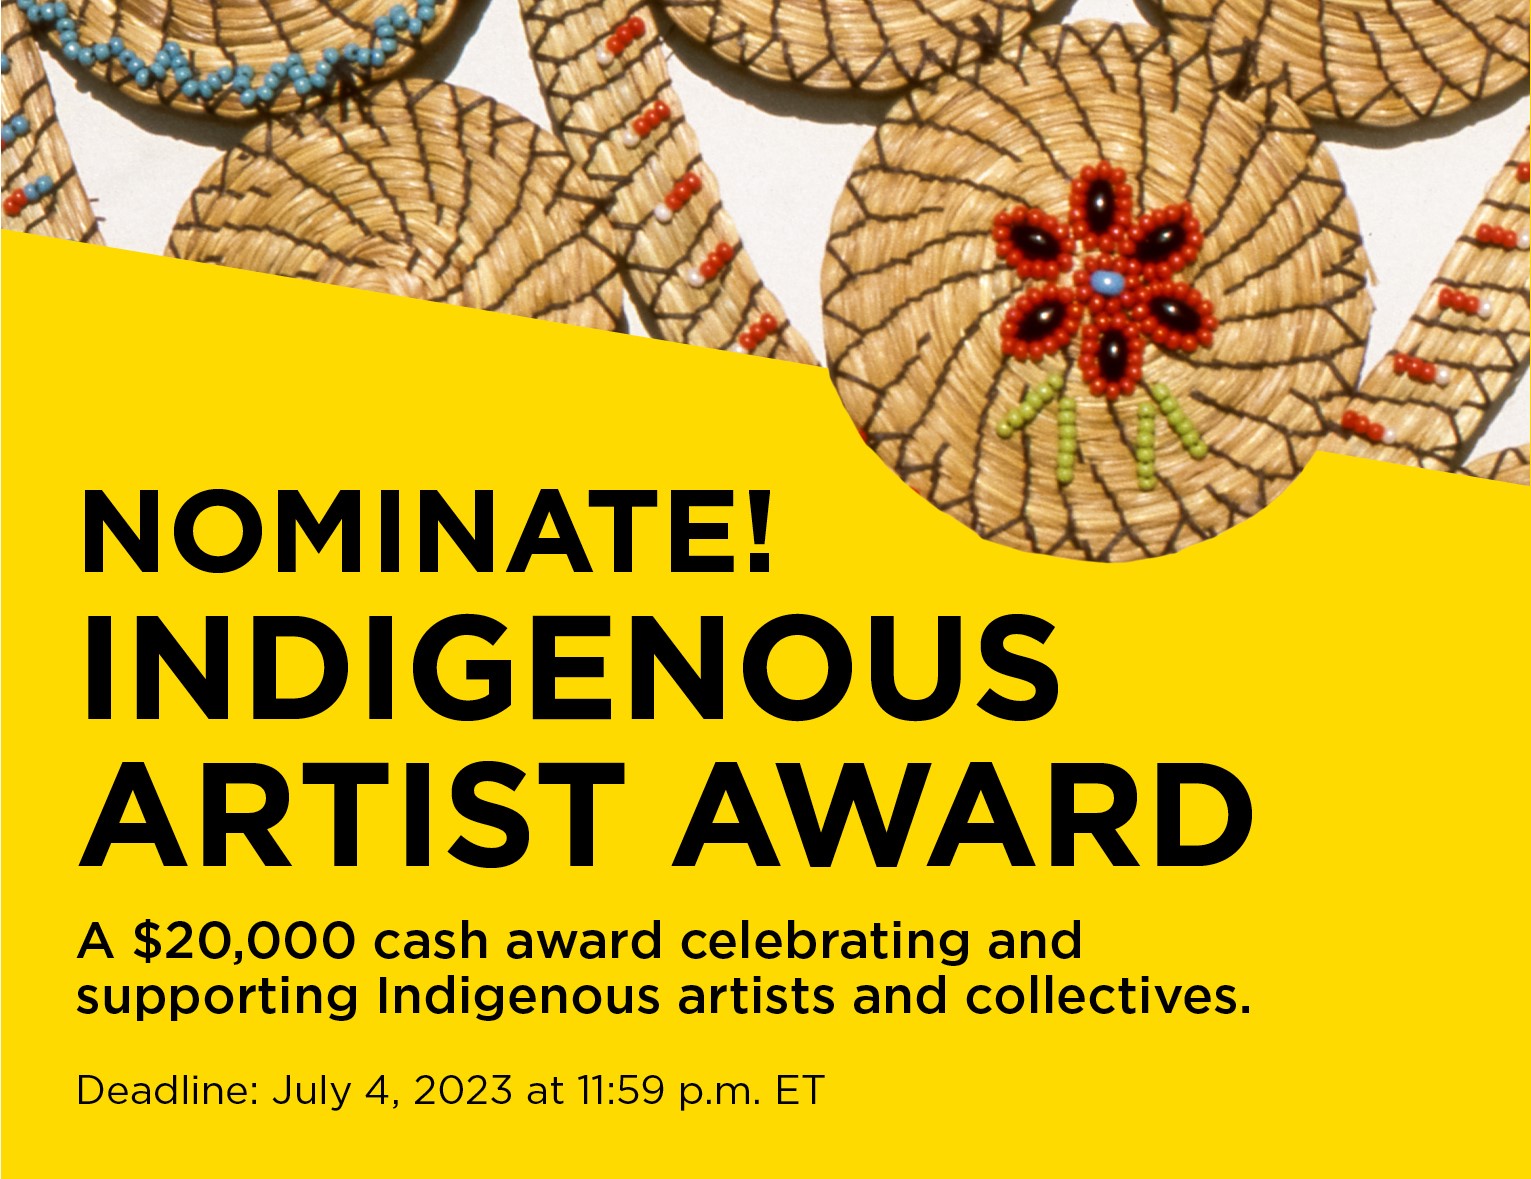 Nominations open for Indigenous Artist Award. Nominate by July 18, 2022